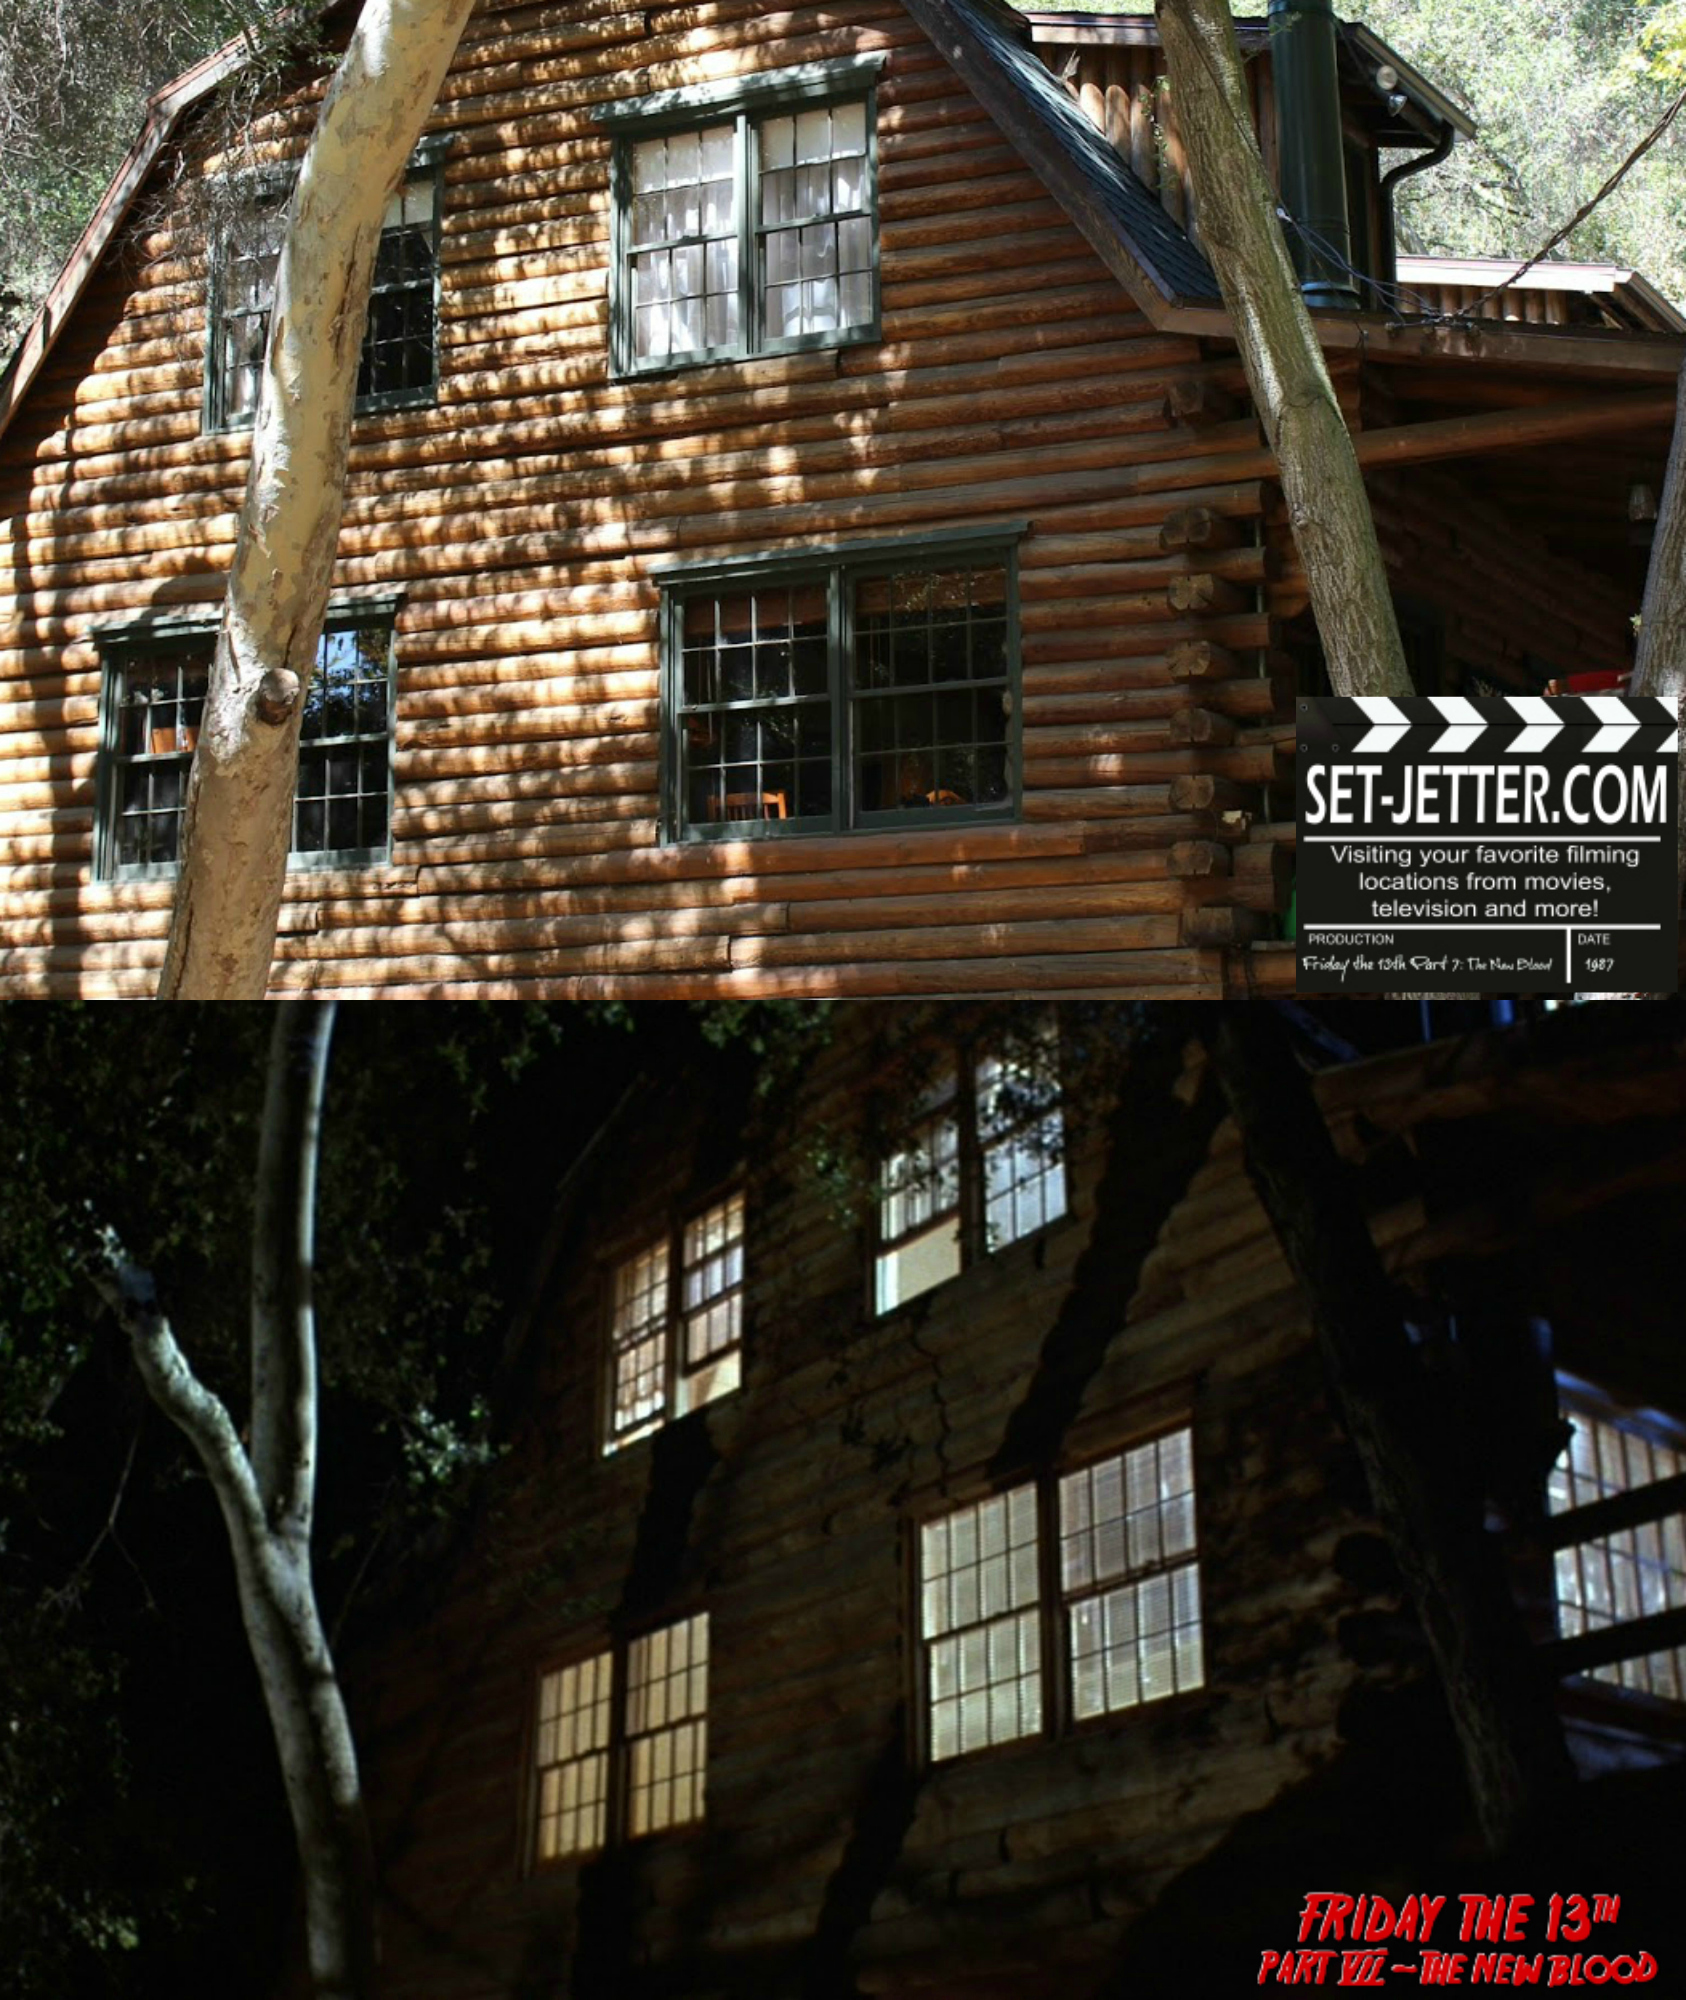 Friday the 13th Part VII comparison 03.jpg